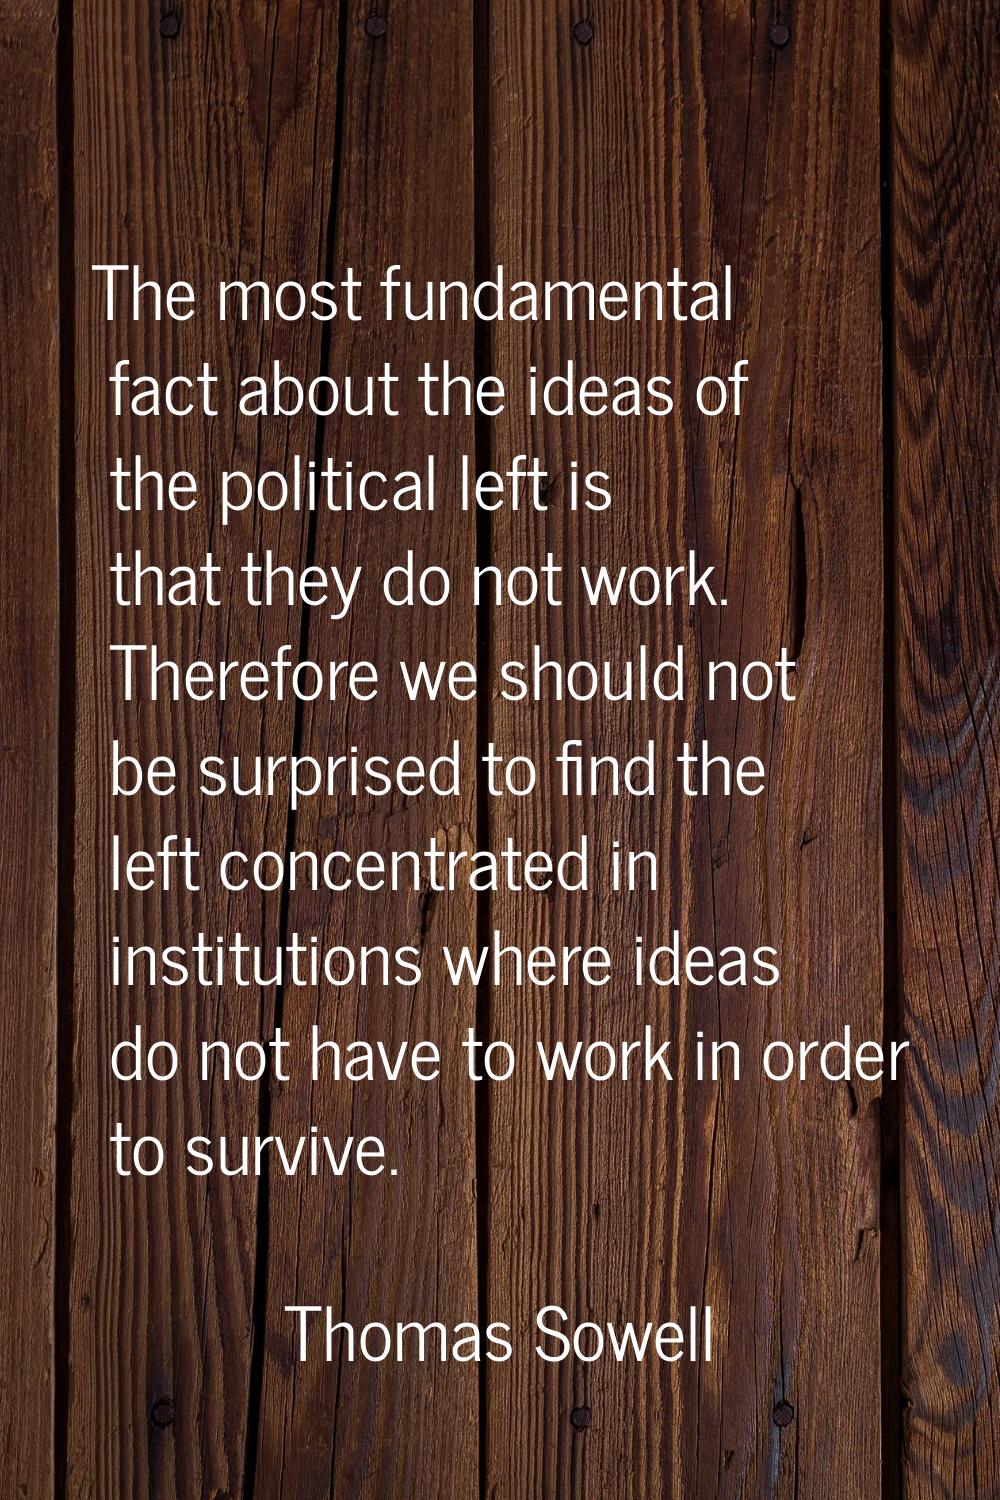 The most fundamental fact about the ideas of the political left is that they do not work. Therefore